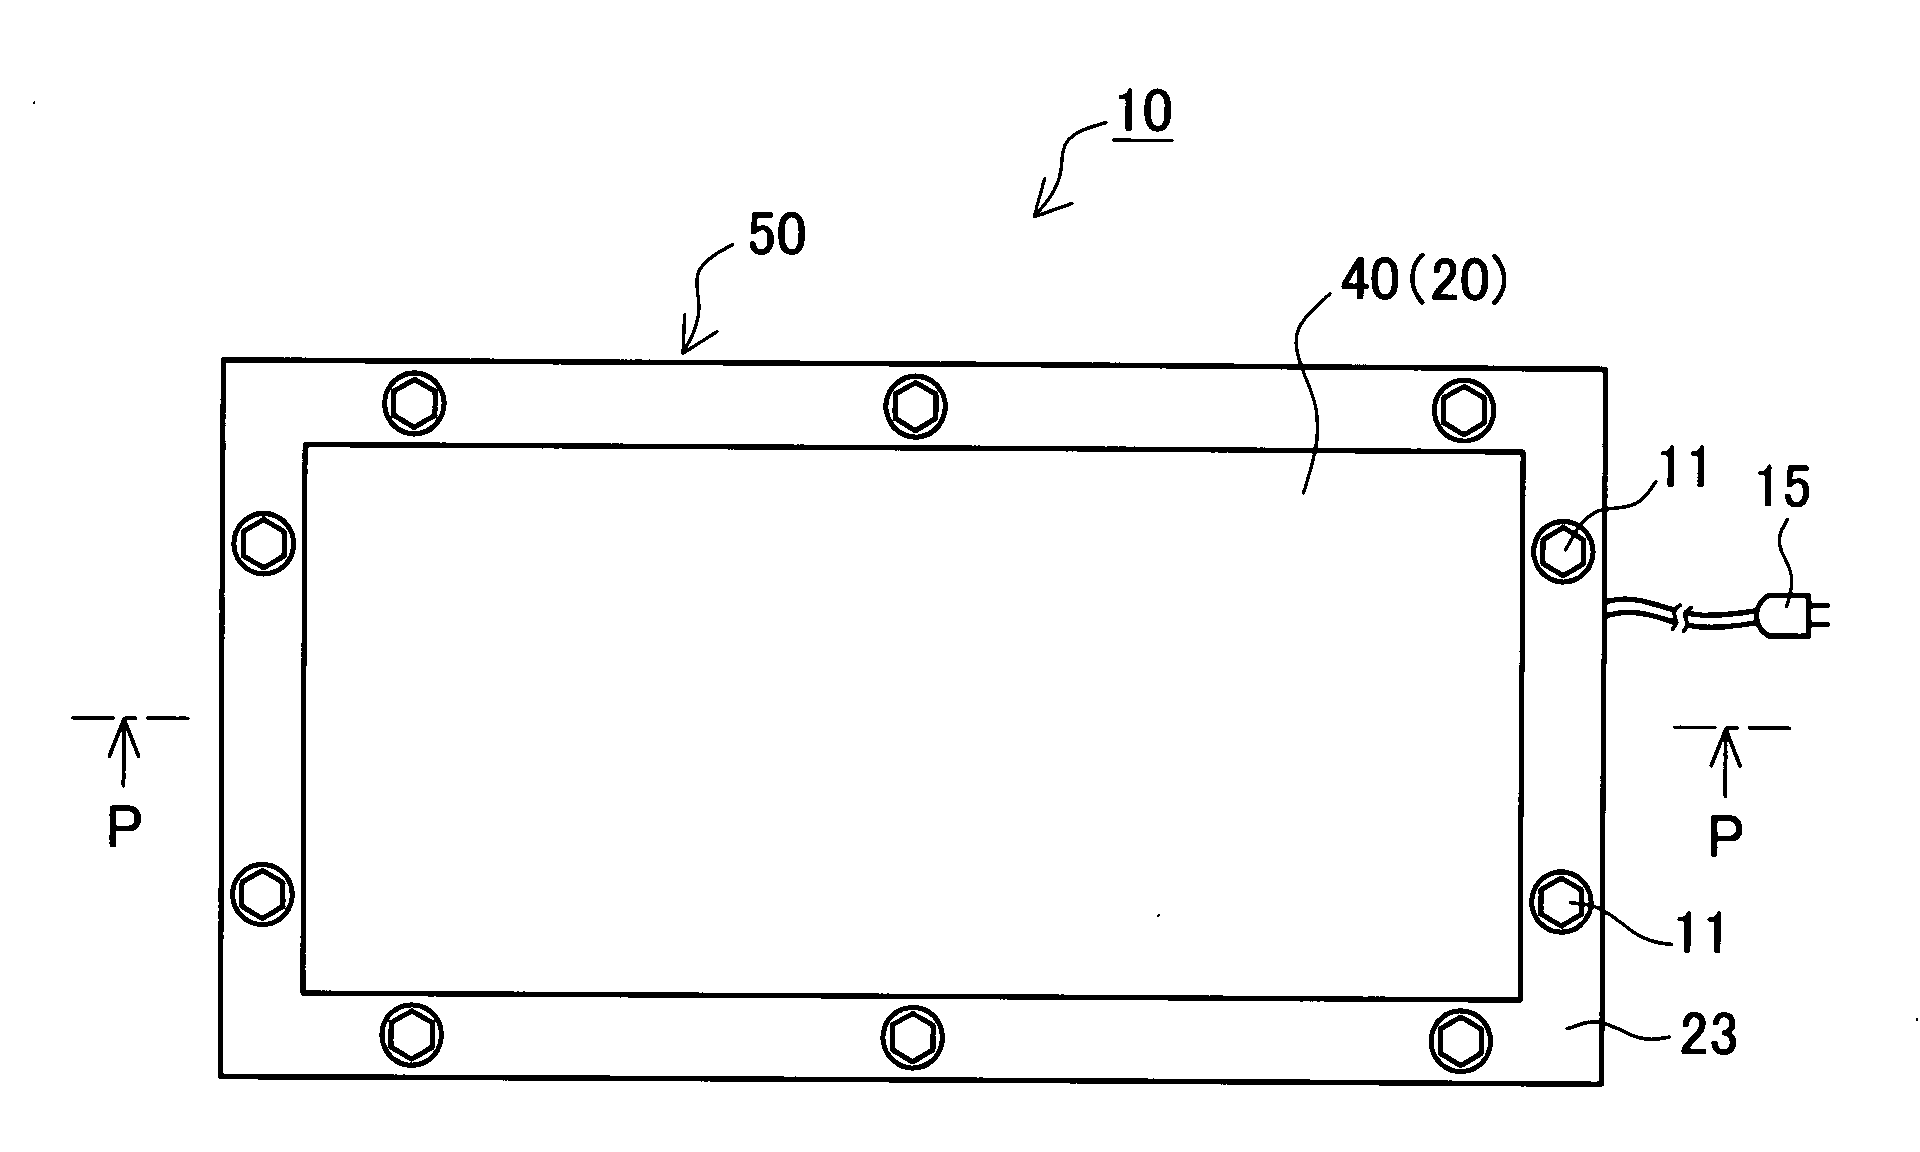 Battery pack structure with heater